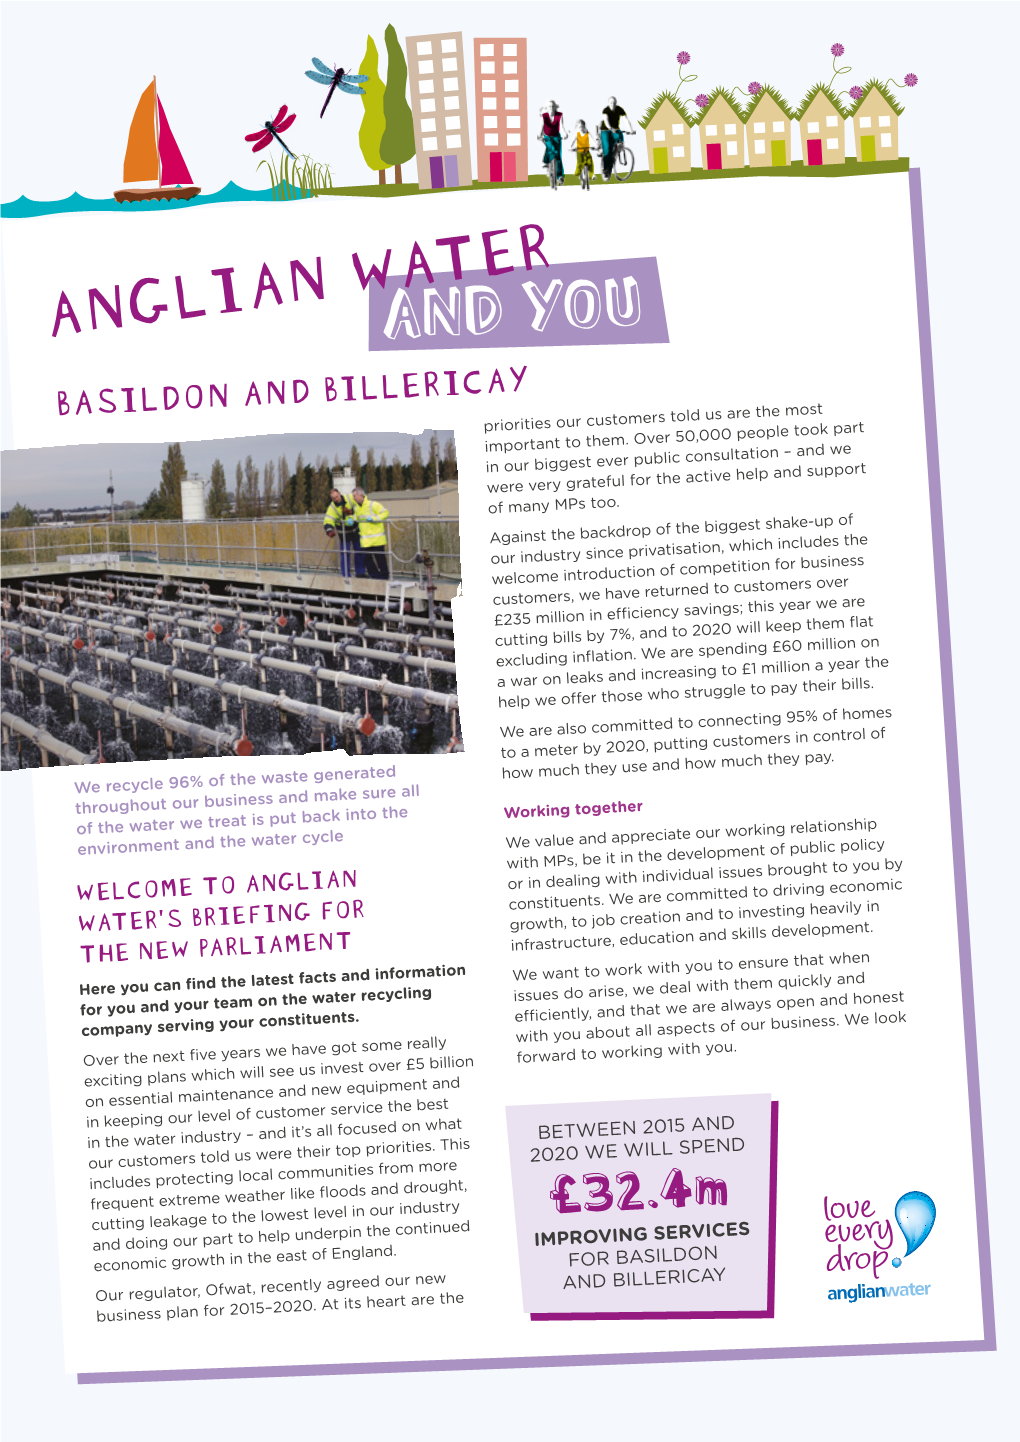 ANGLIAN WATERAND YOU BASILDON and BILLERICAY Priorities Our Customers Told Us Are the Most Important to Them